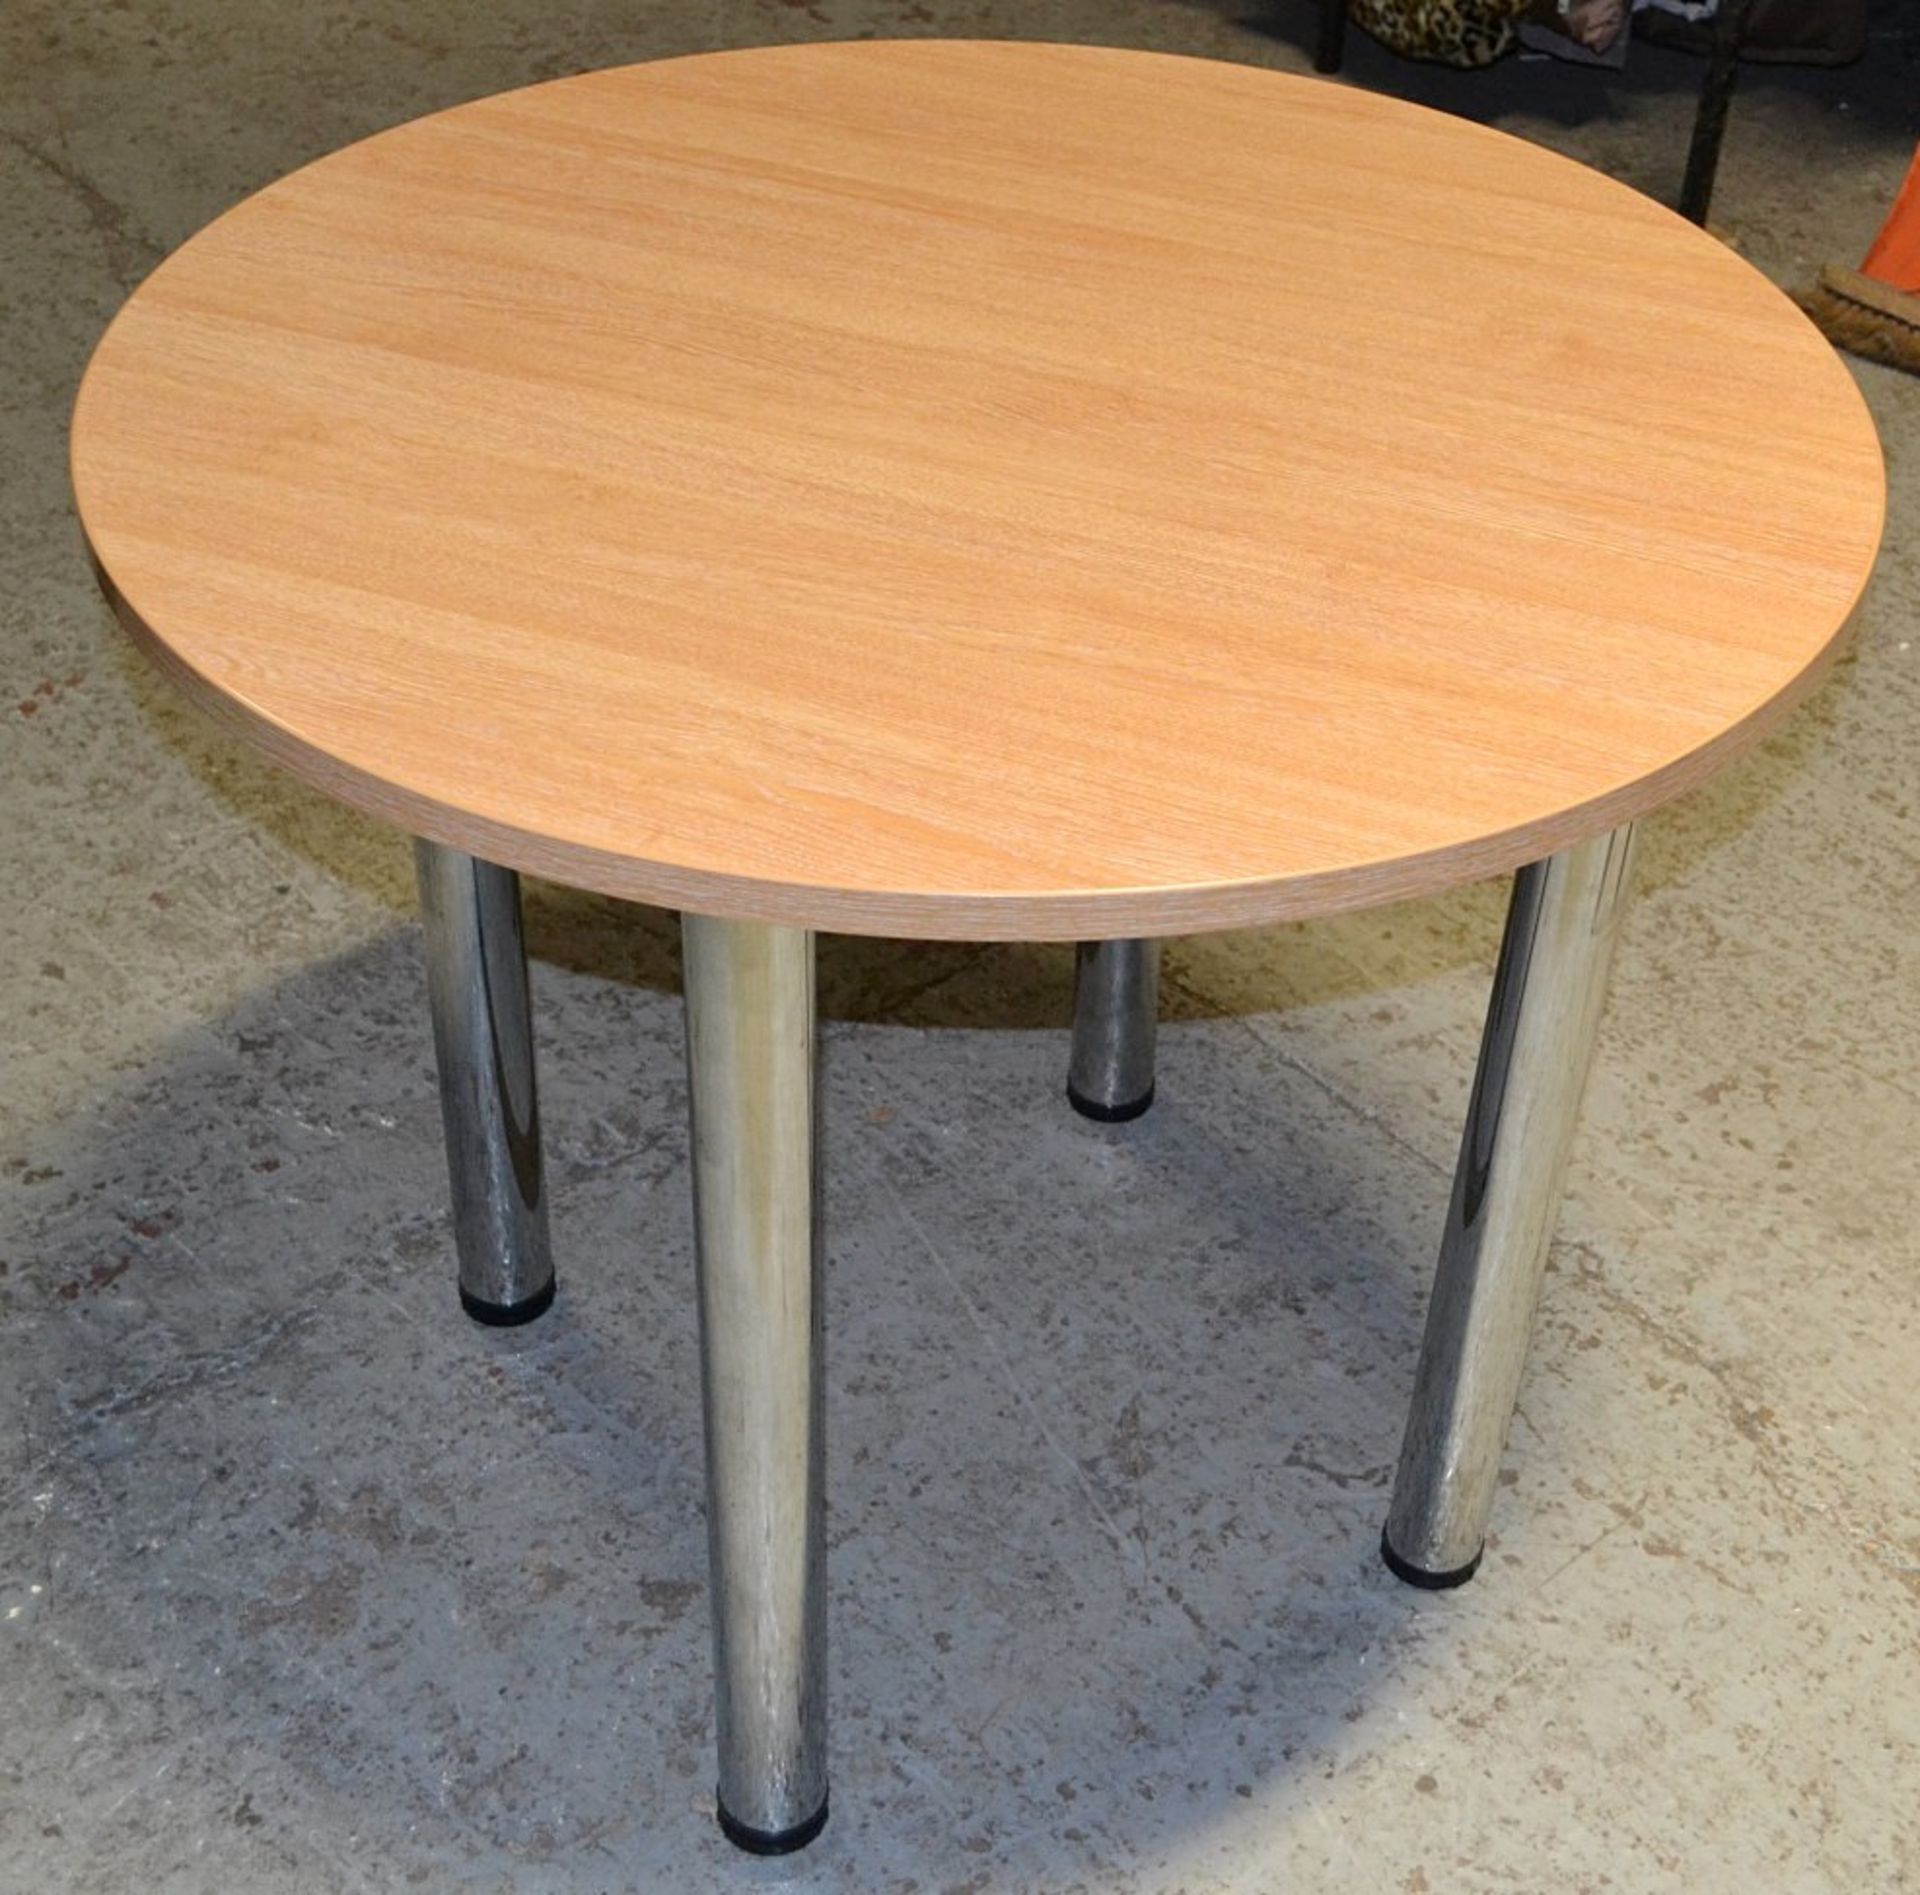 1 x Round Office Table With "Brevettato Gieffe" Metal Legs - Dimensions: Diameter 90cm x Height 74cm - Image 2 of 3